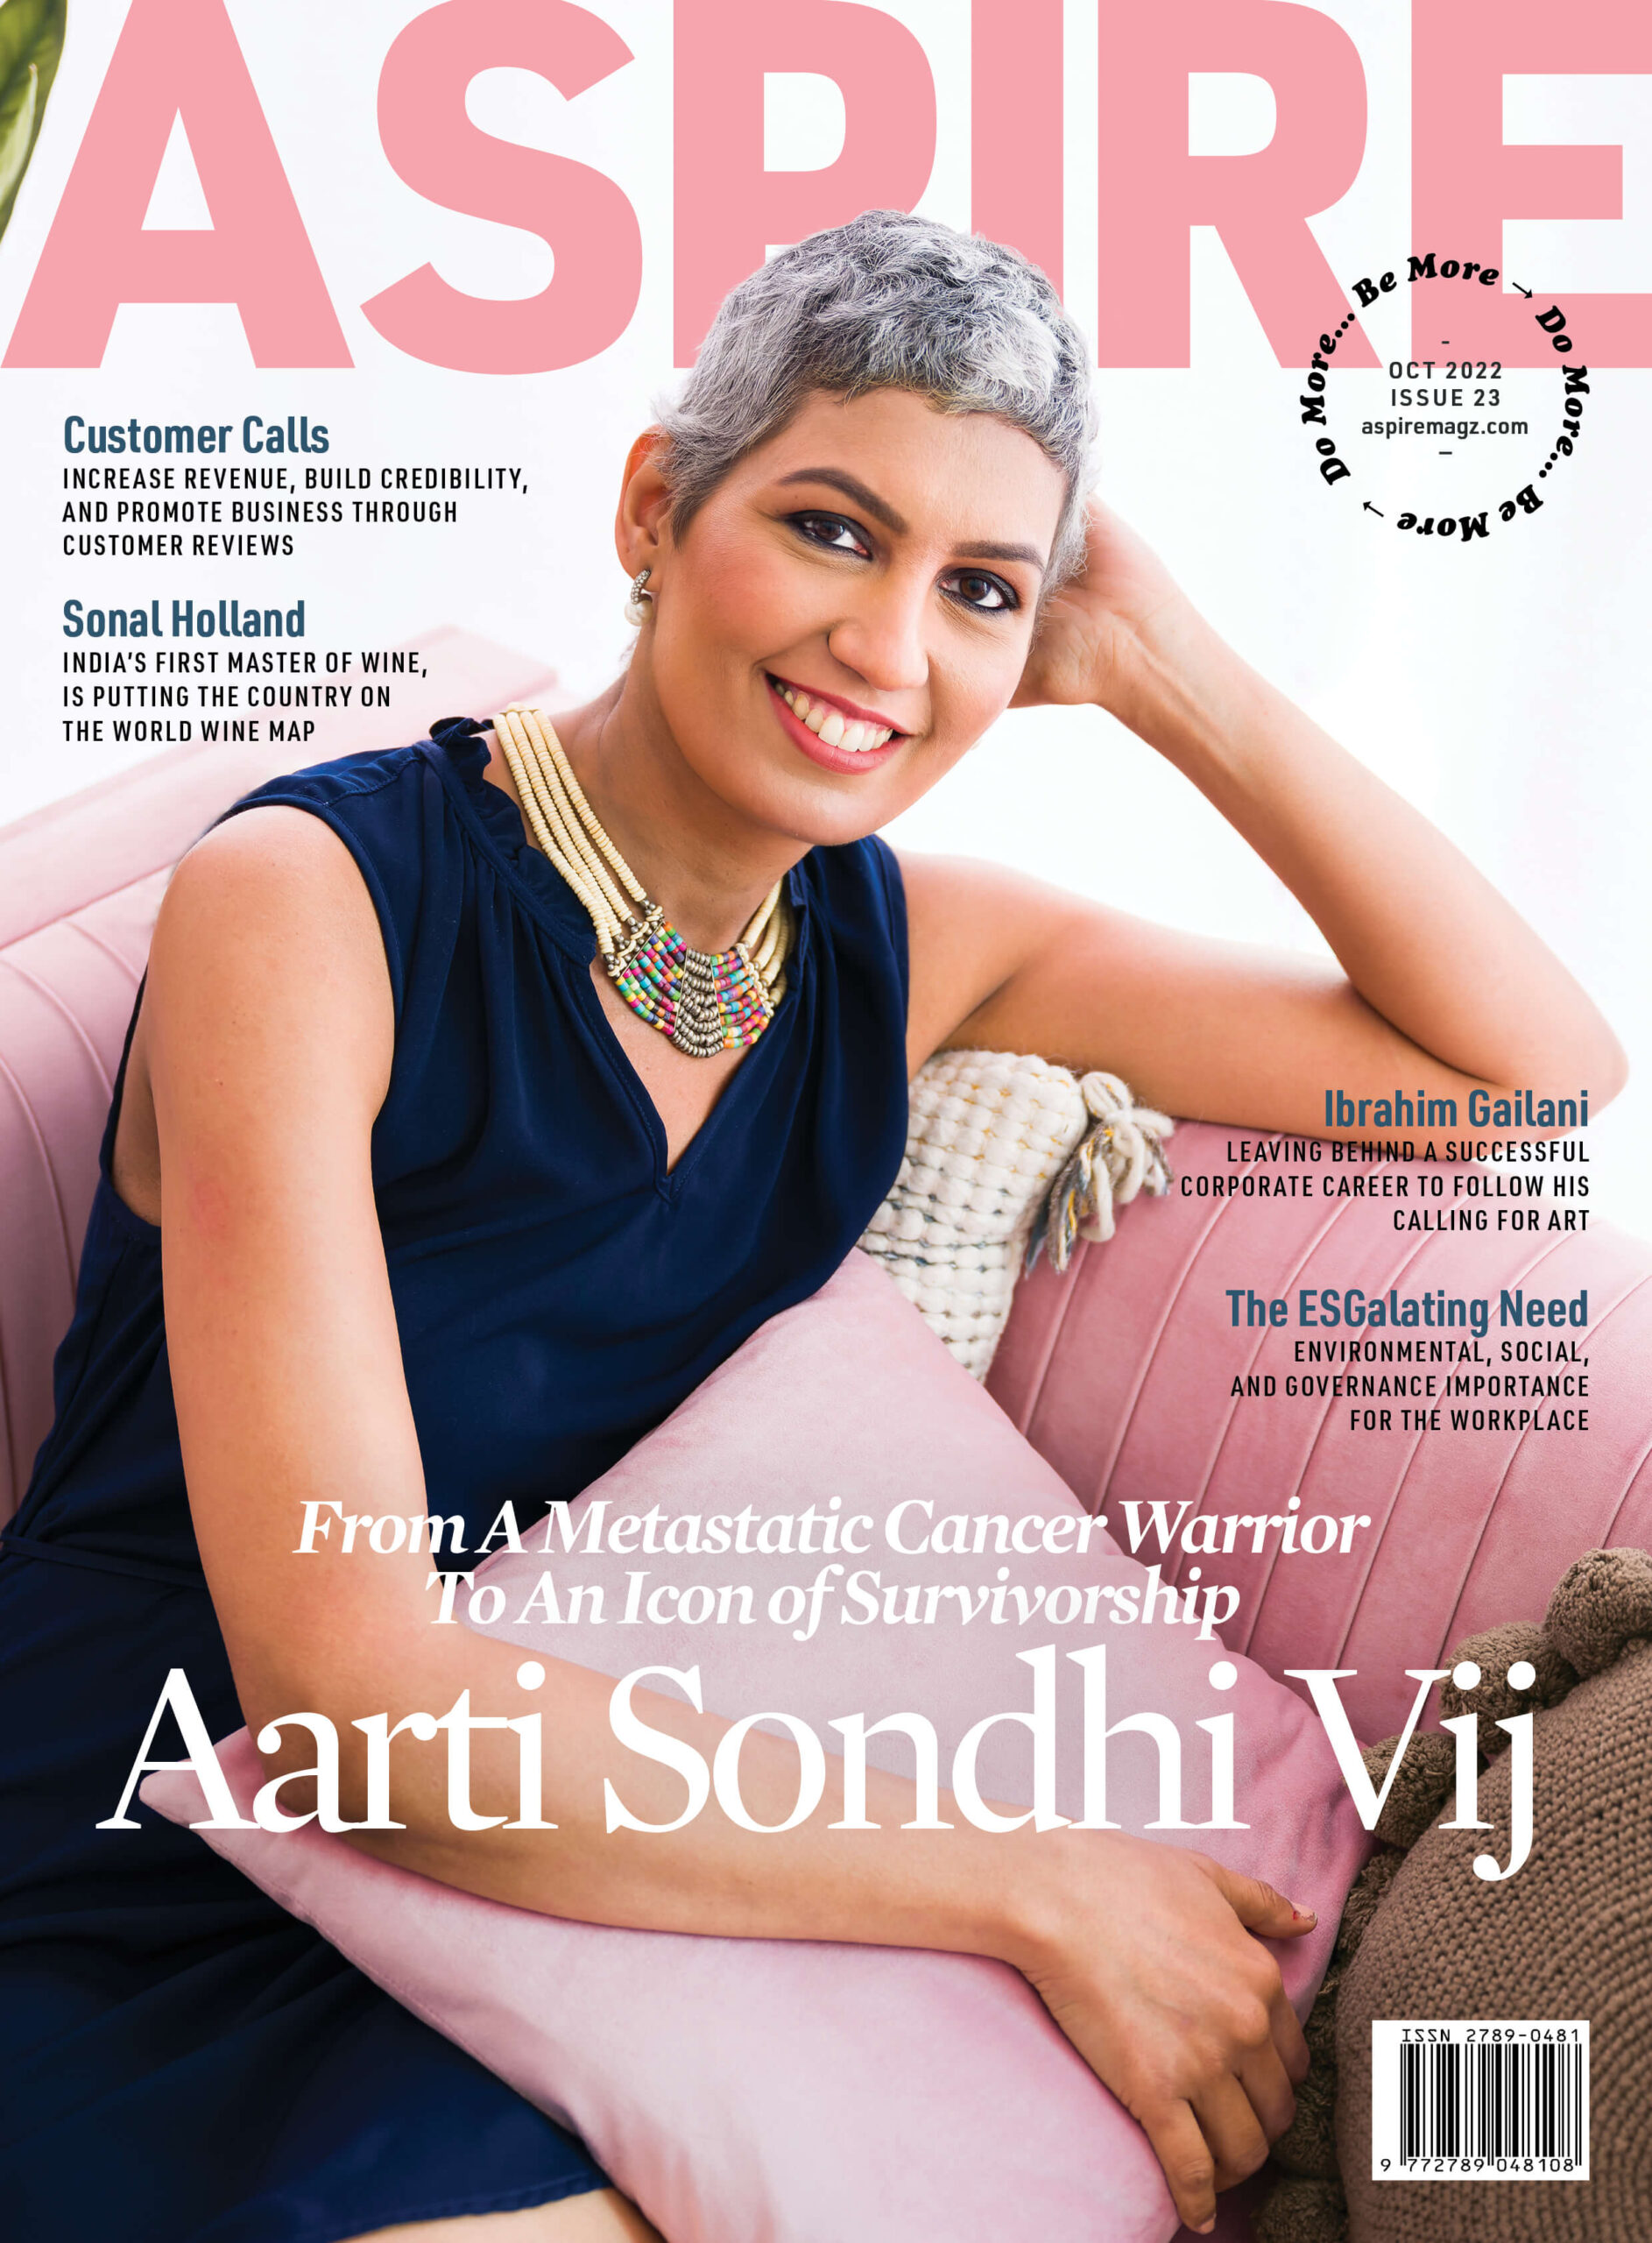 Aarti Sondhi on the cover of Aspire magazine